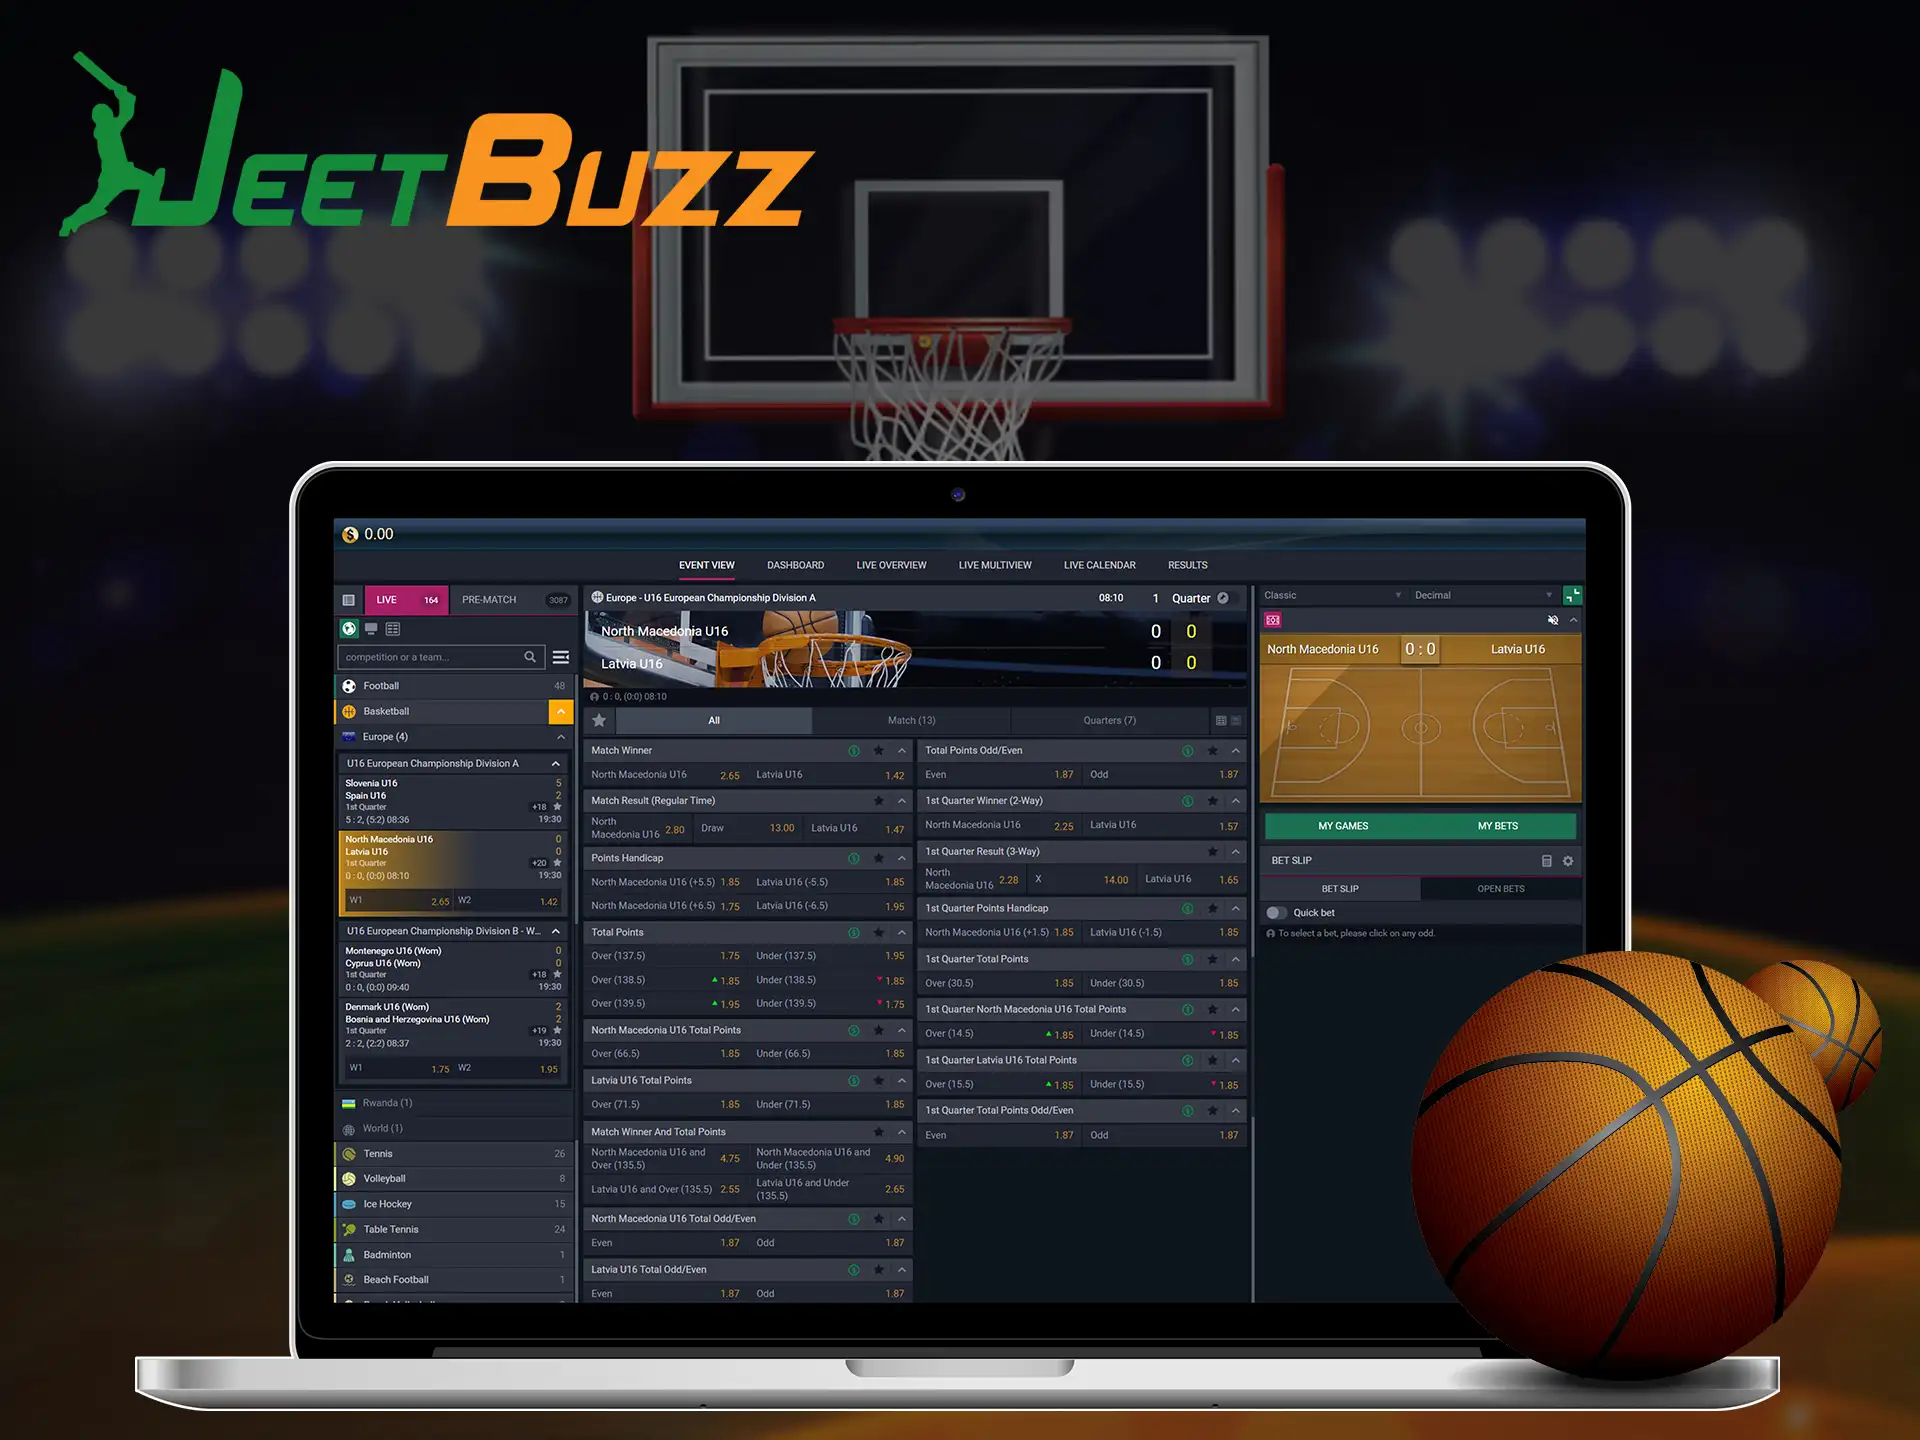 Choose basketball in JeetBuzz sportsbook and place your bets.